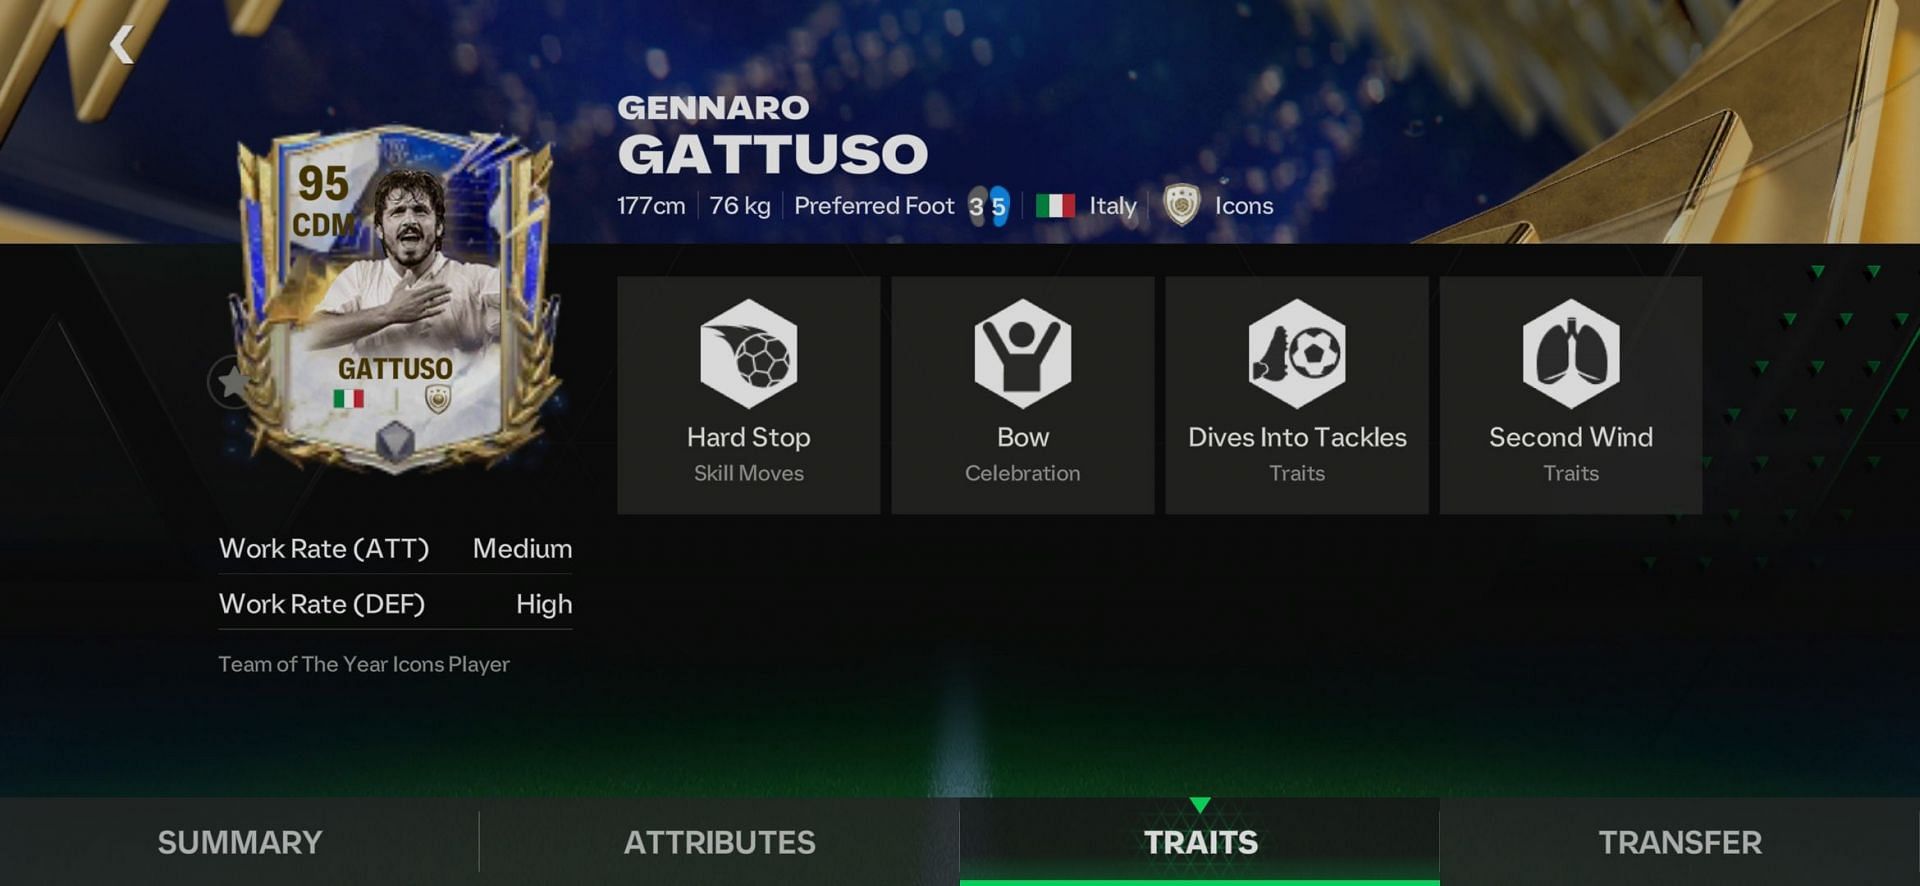 Gennaro Gattuso was considered to be a &quot;midfielder with oxygen cylinder,&quot; deservingly received the FC Mobile Second Wind trait (Image via EA Sports)